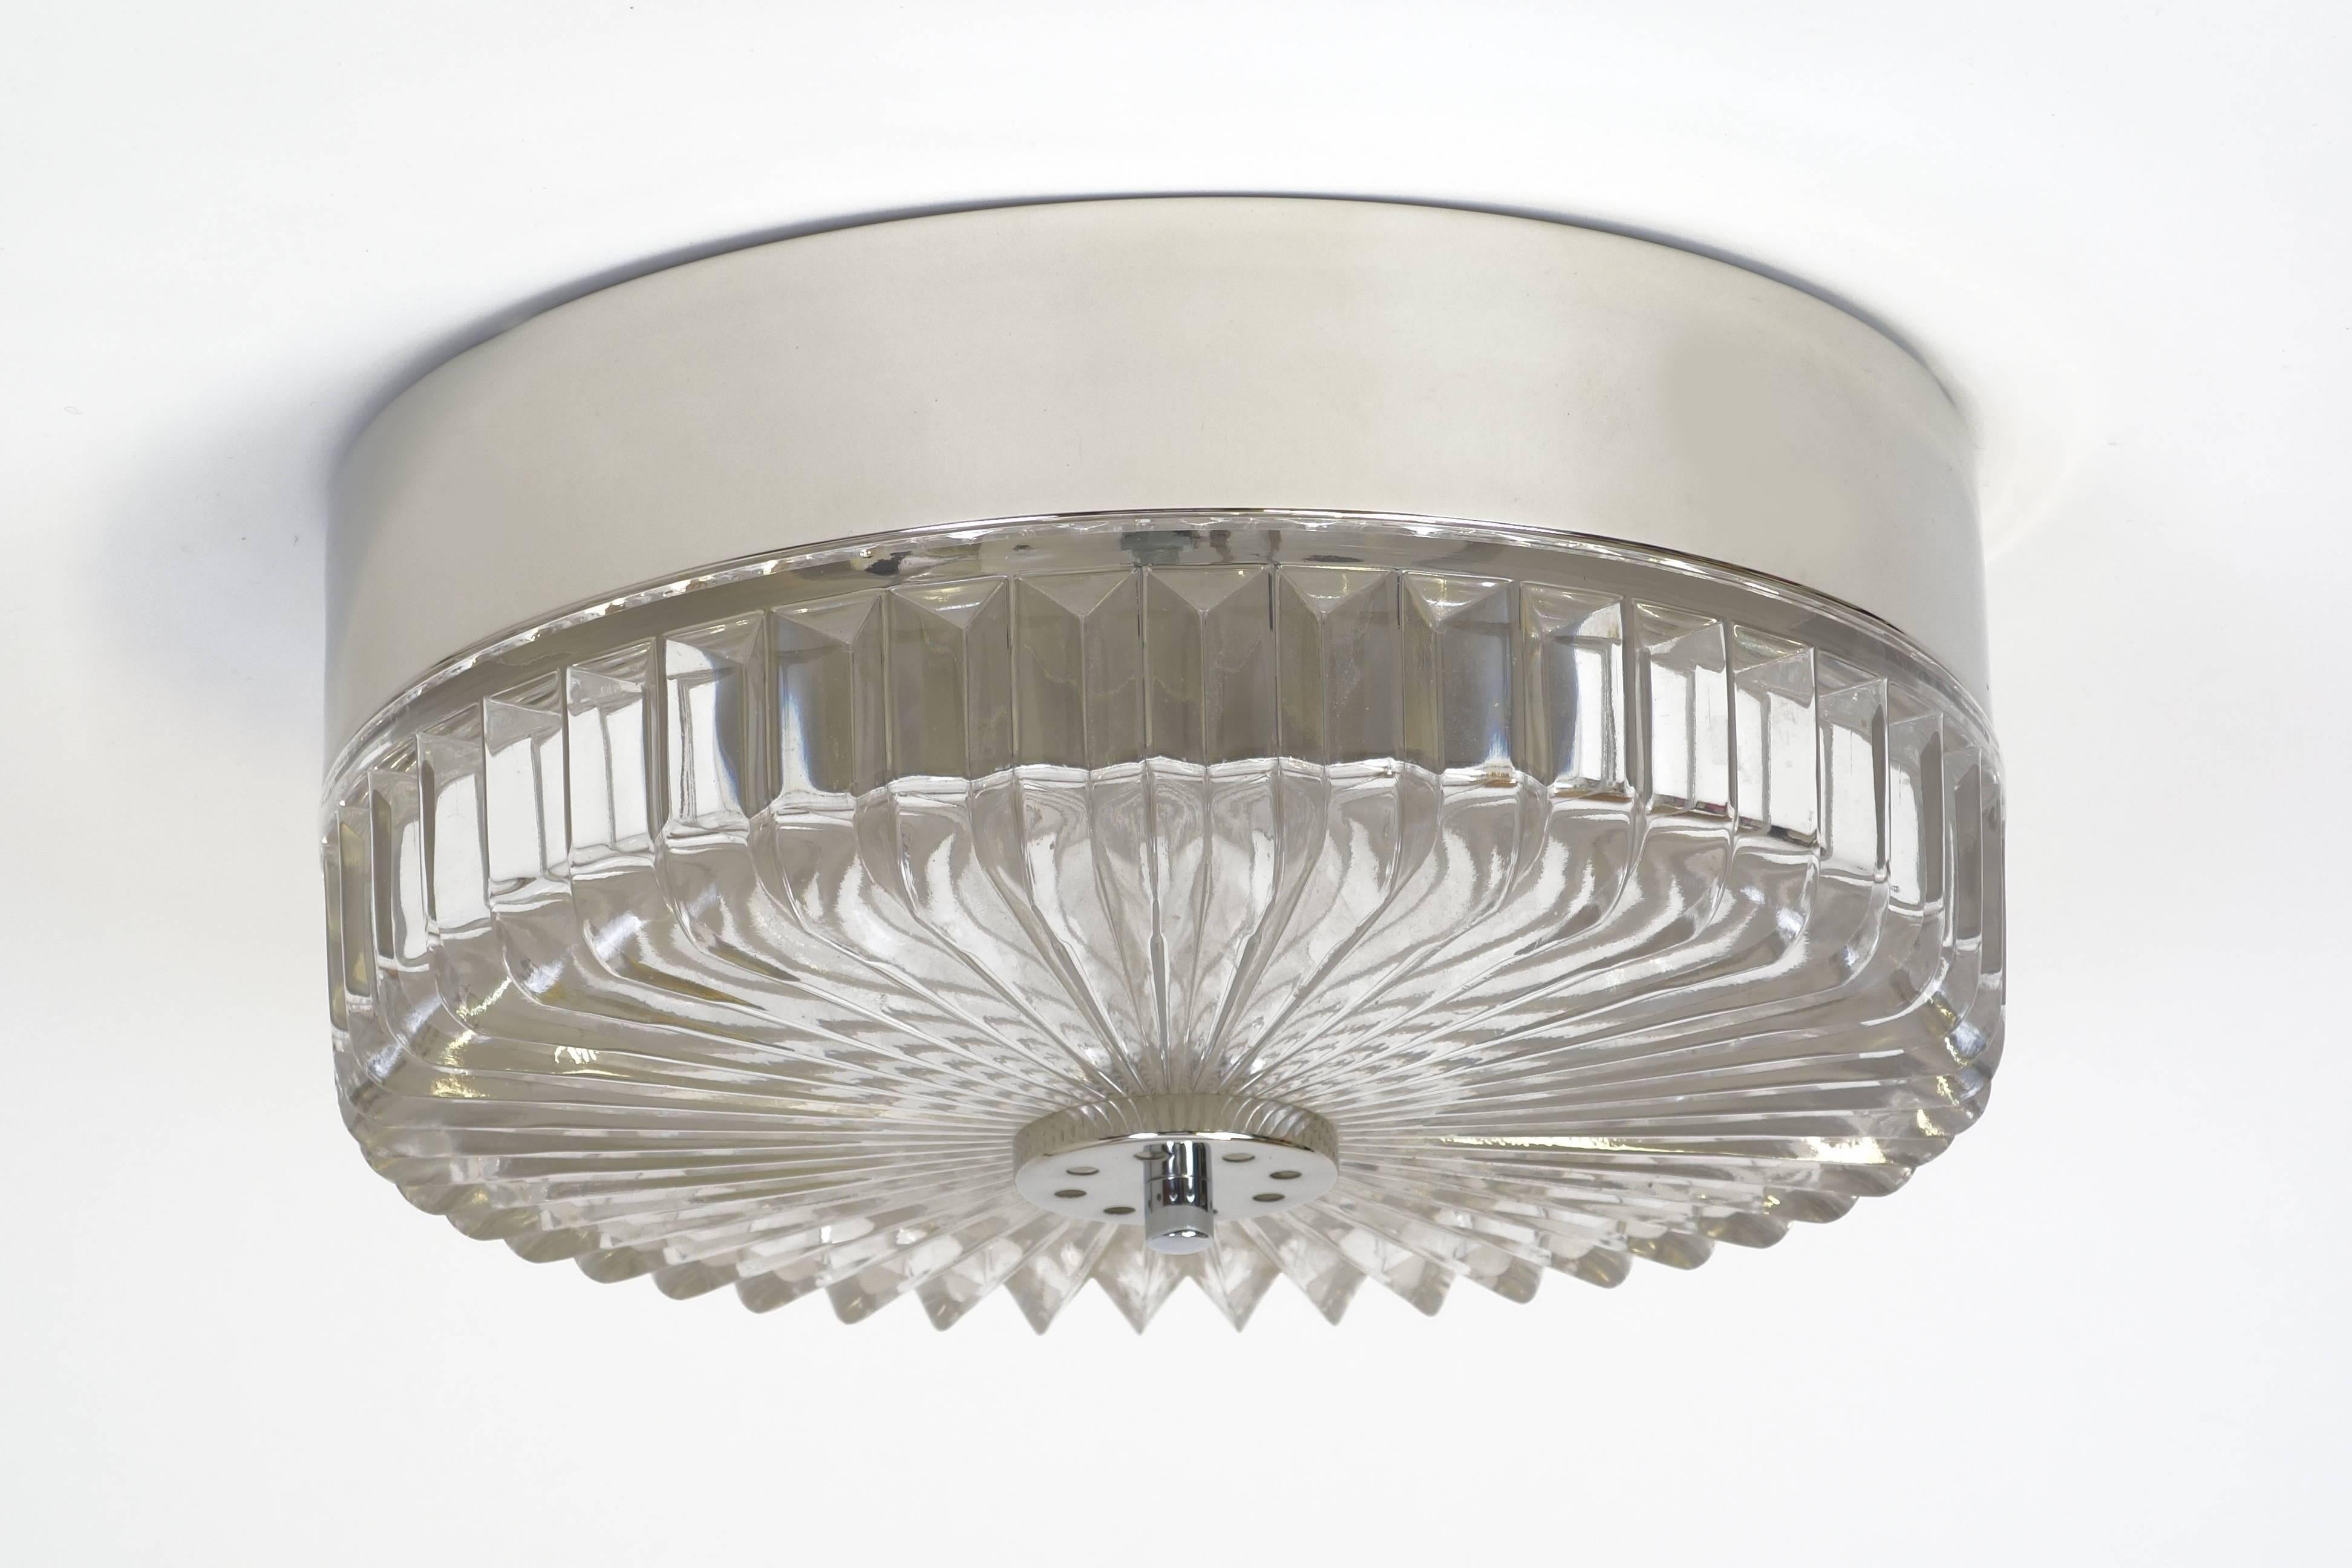 Preciously appearing ceiling lamp in the shape of a turbine wheel. The metal sheath is of nickel plated aluminium and has three bulbs within. The fluted glass disc is made of one single piece, fixed with a non-visible screw nut in the middle. Very